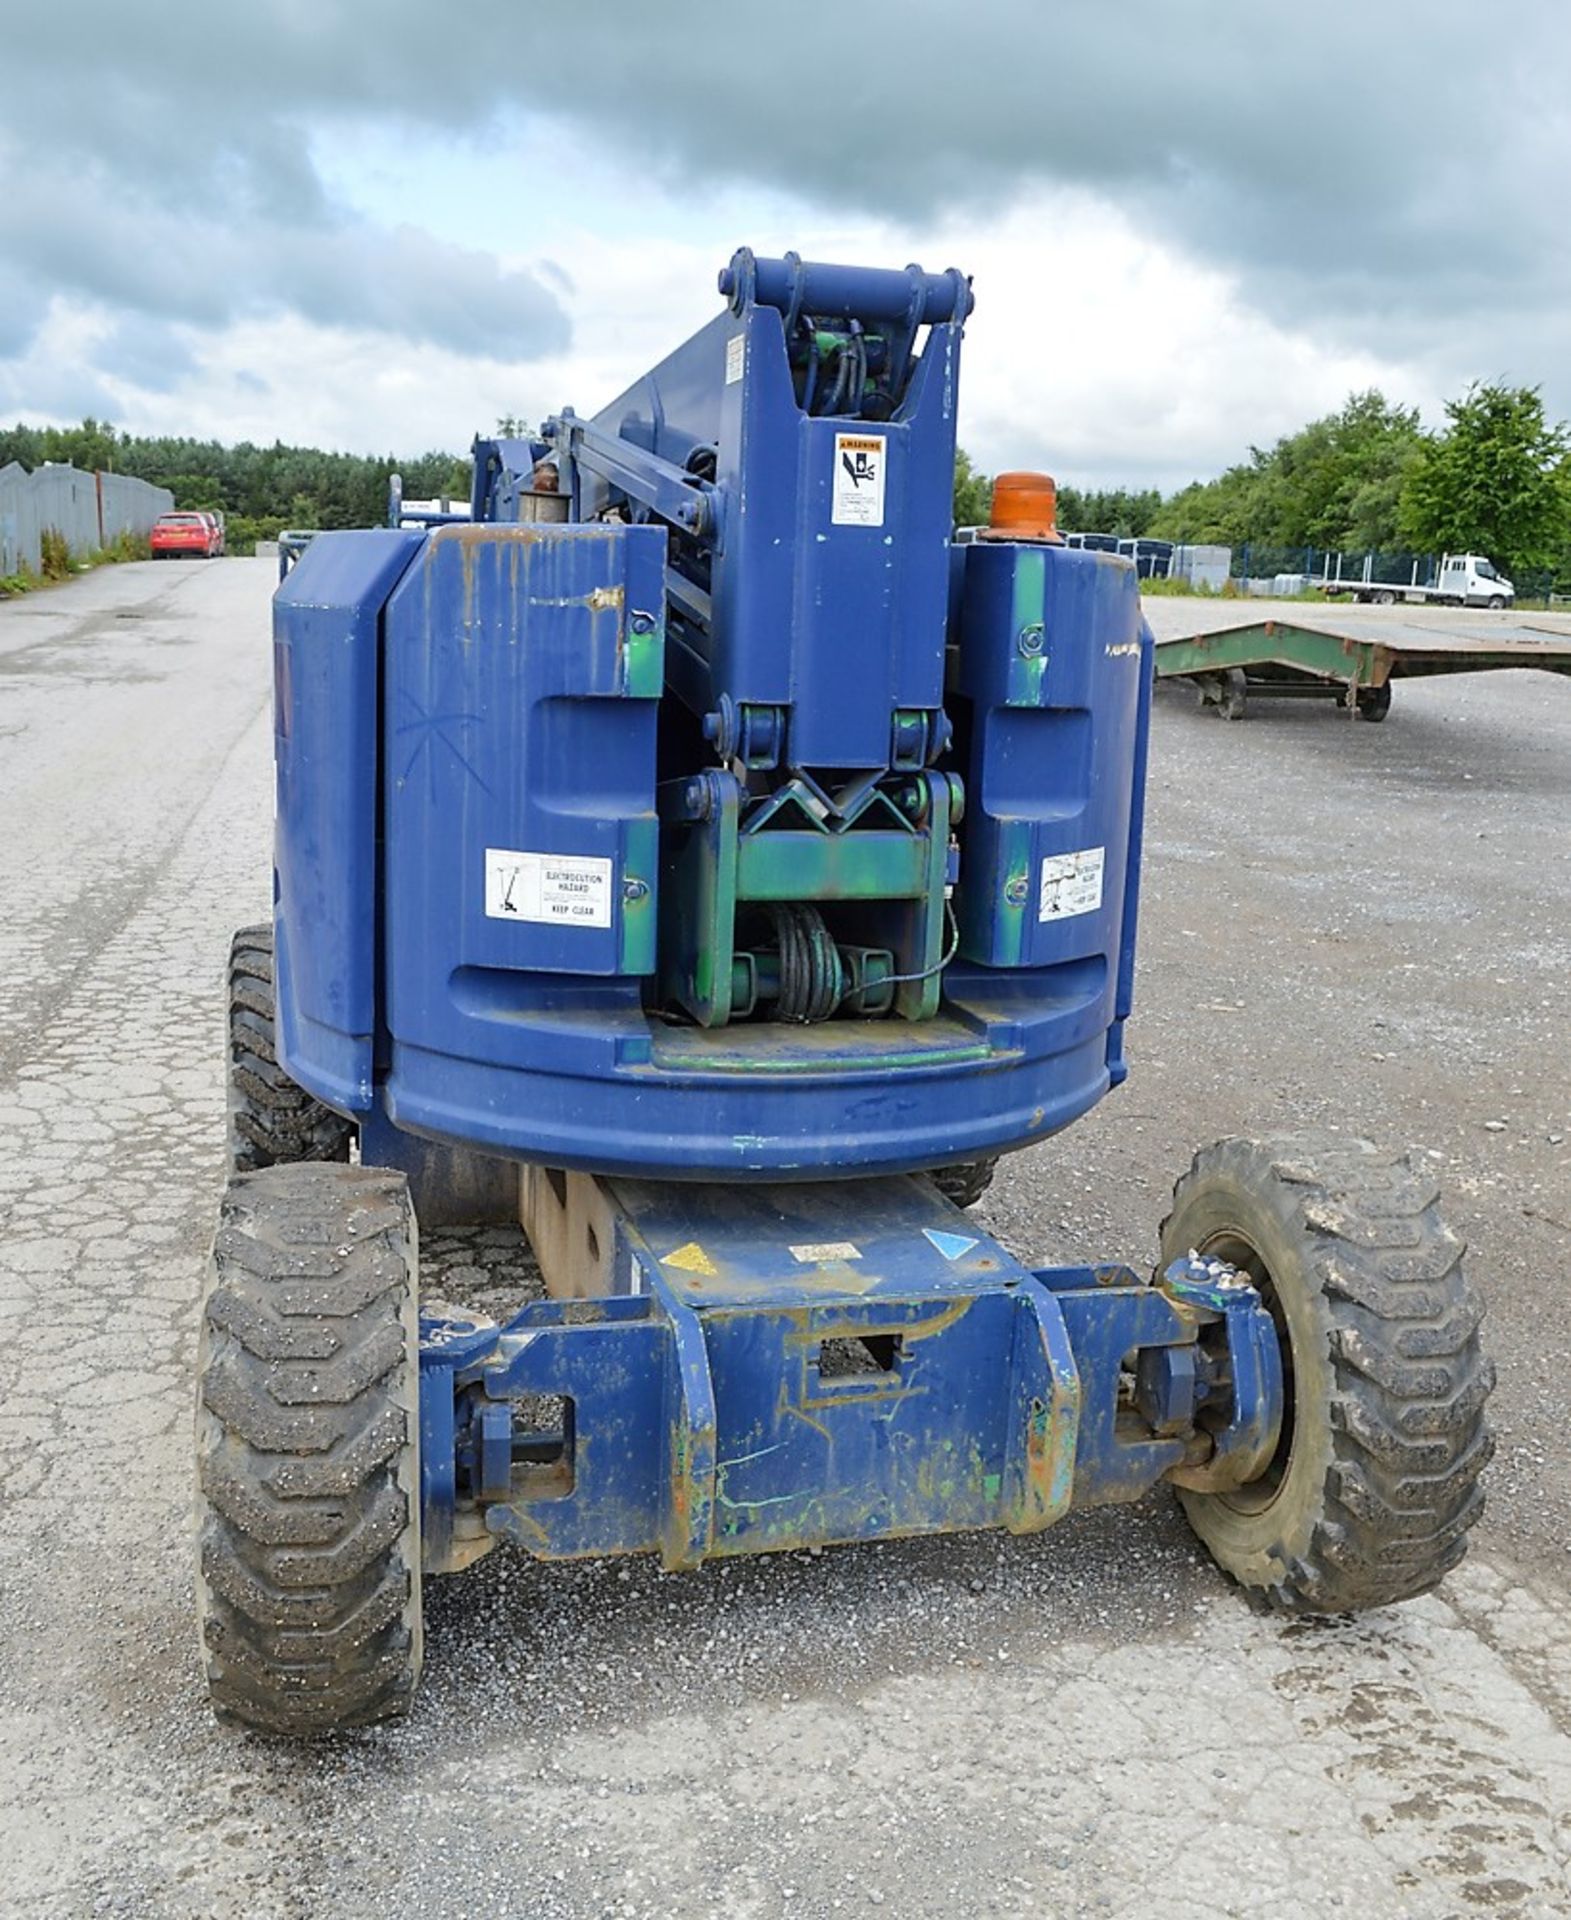 Genie Z-34/22 34 ft diesel/battery electric articulated boom access platform Year: 2000 S/N: 34- - Image 6 of 11